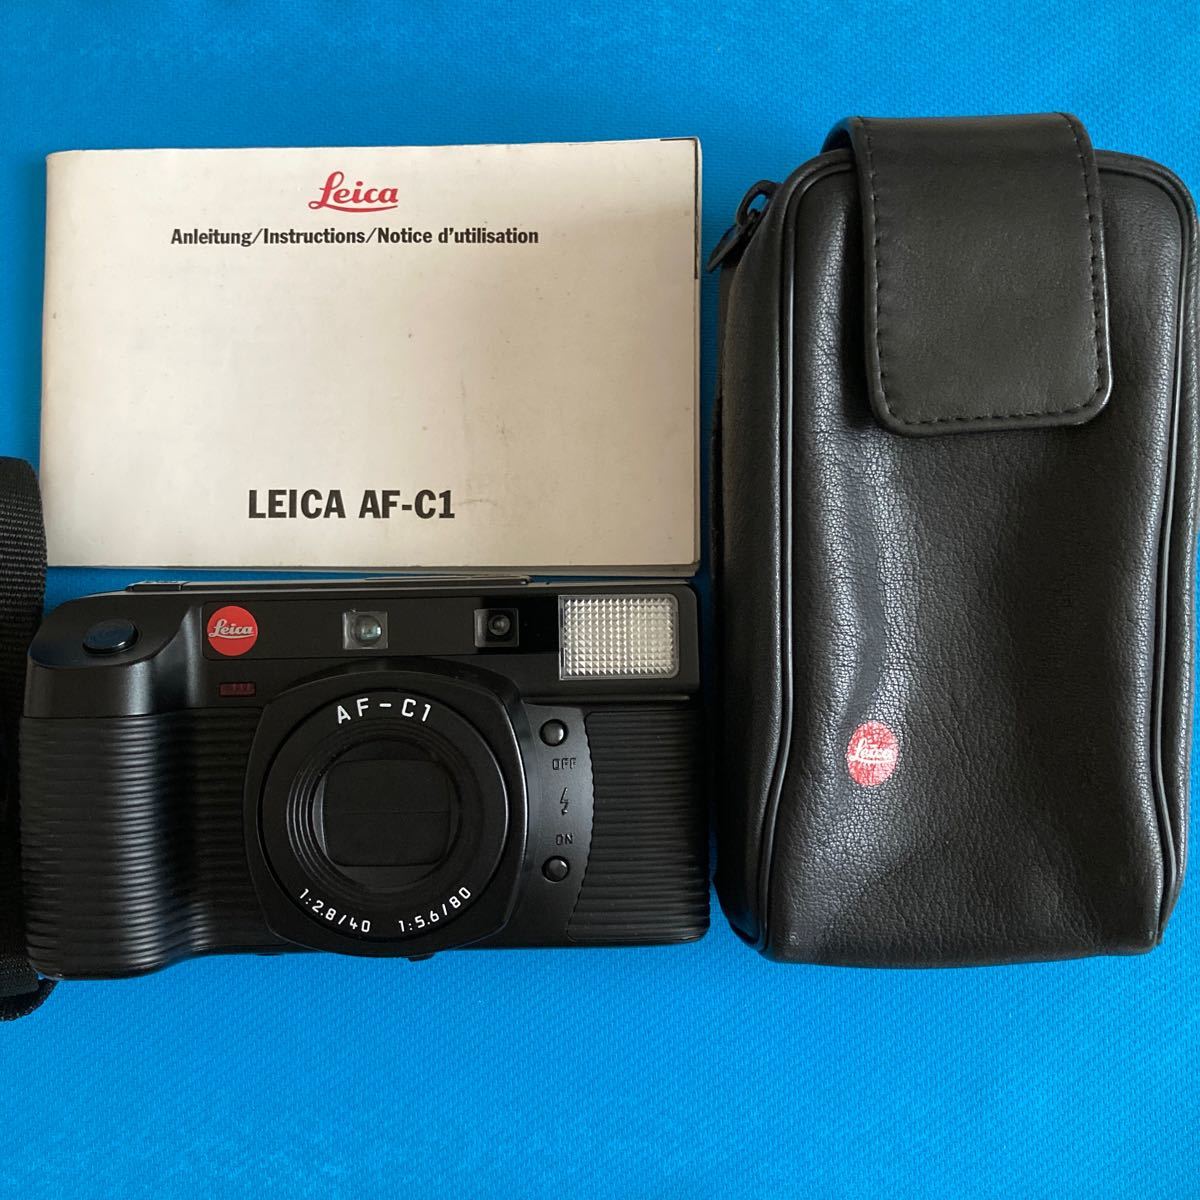 Leica AF-C1 フィルムカメラ ケース+説明書付属 カメラ フィルムカメラ